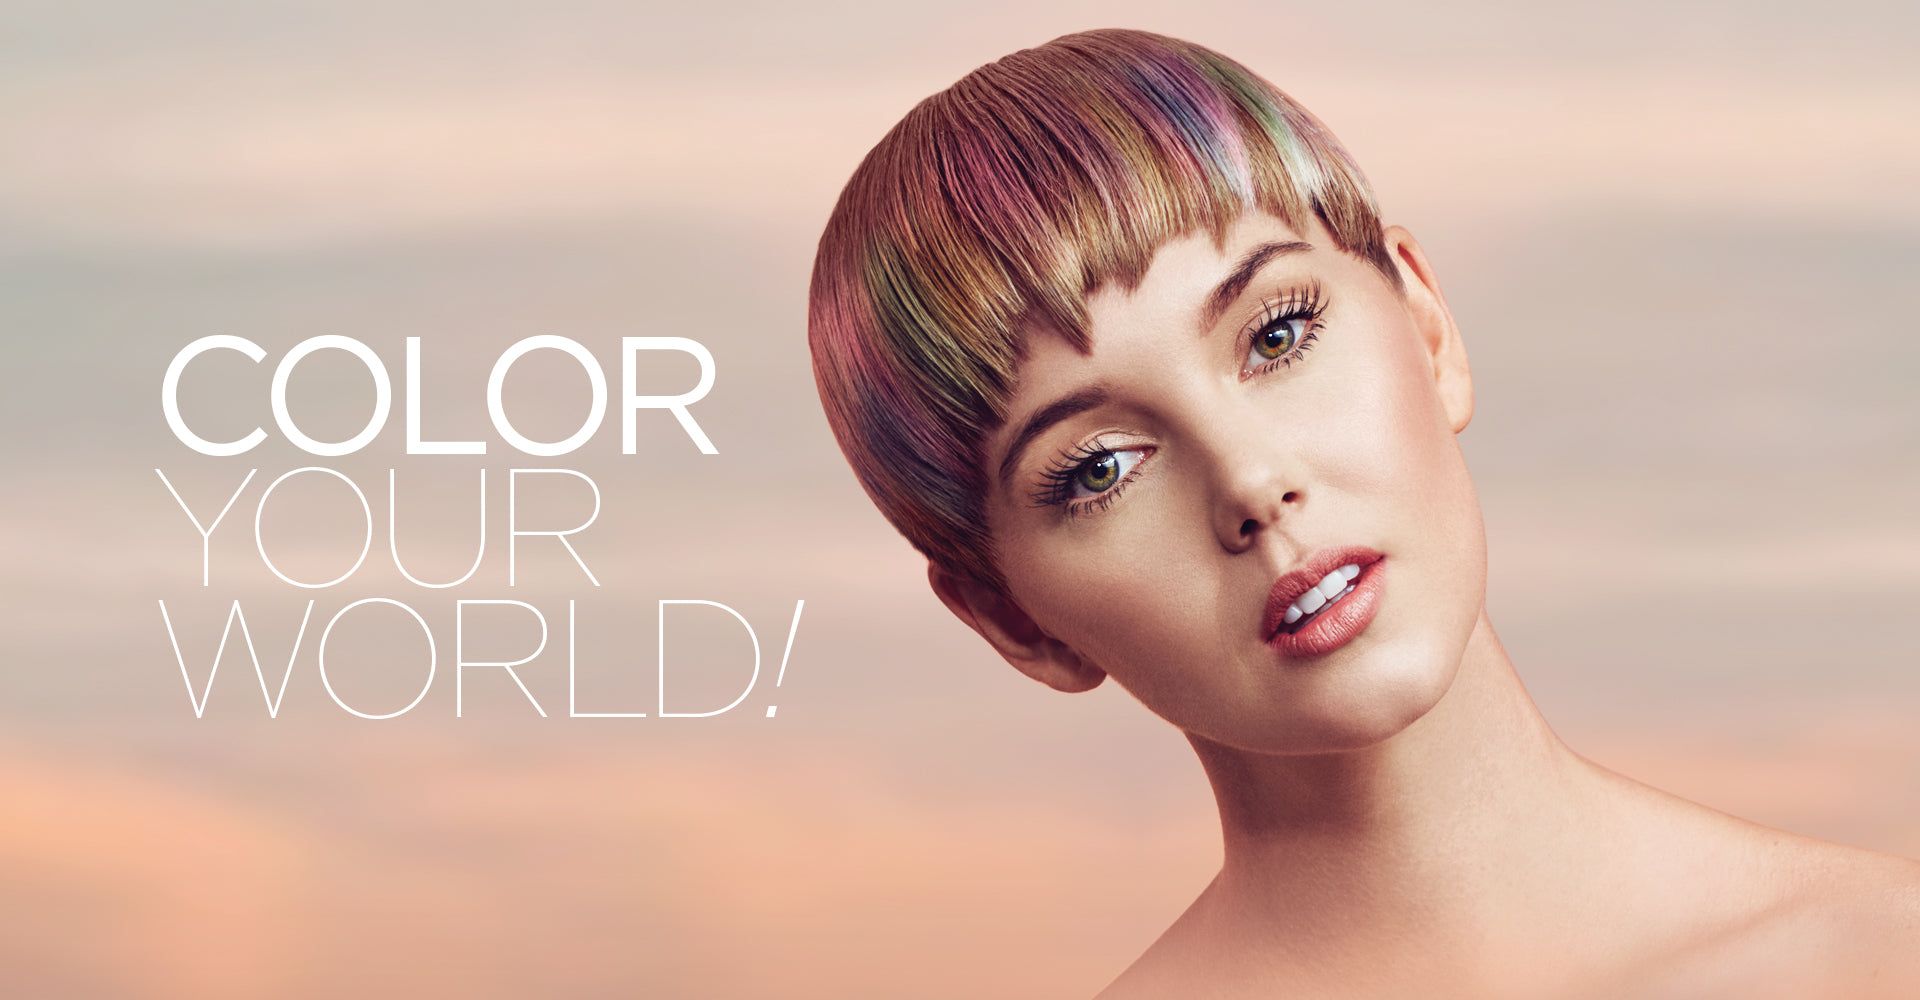 Color Your World!